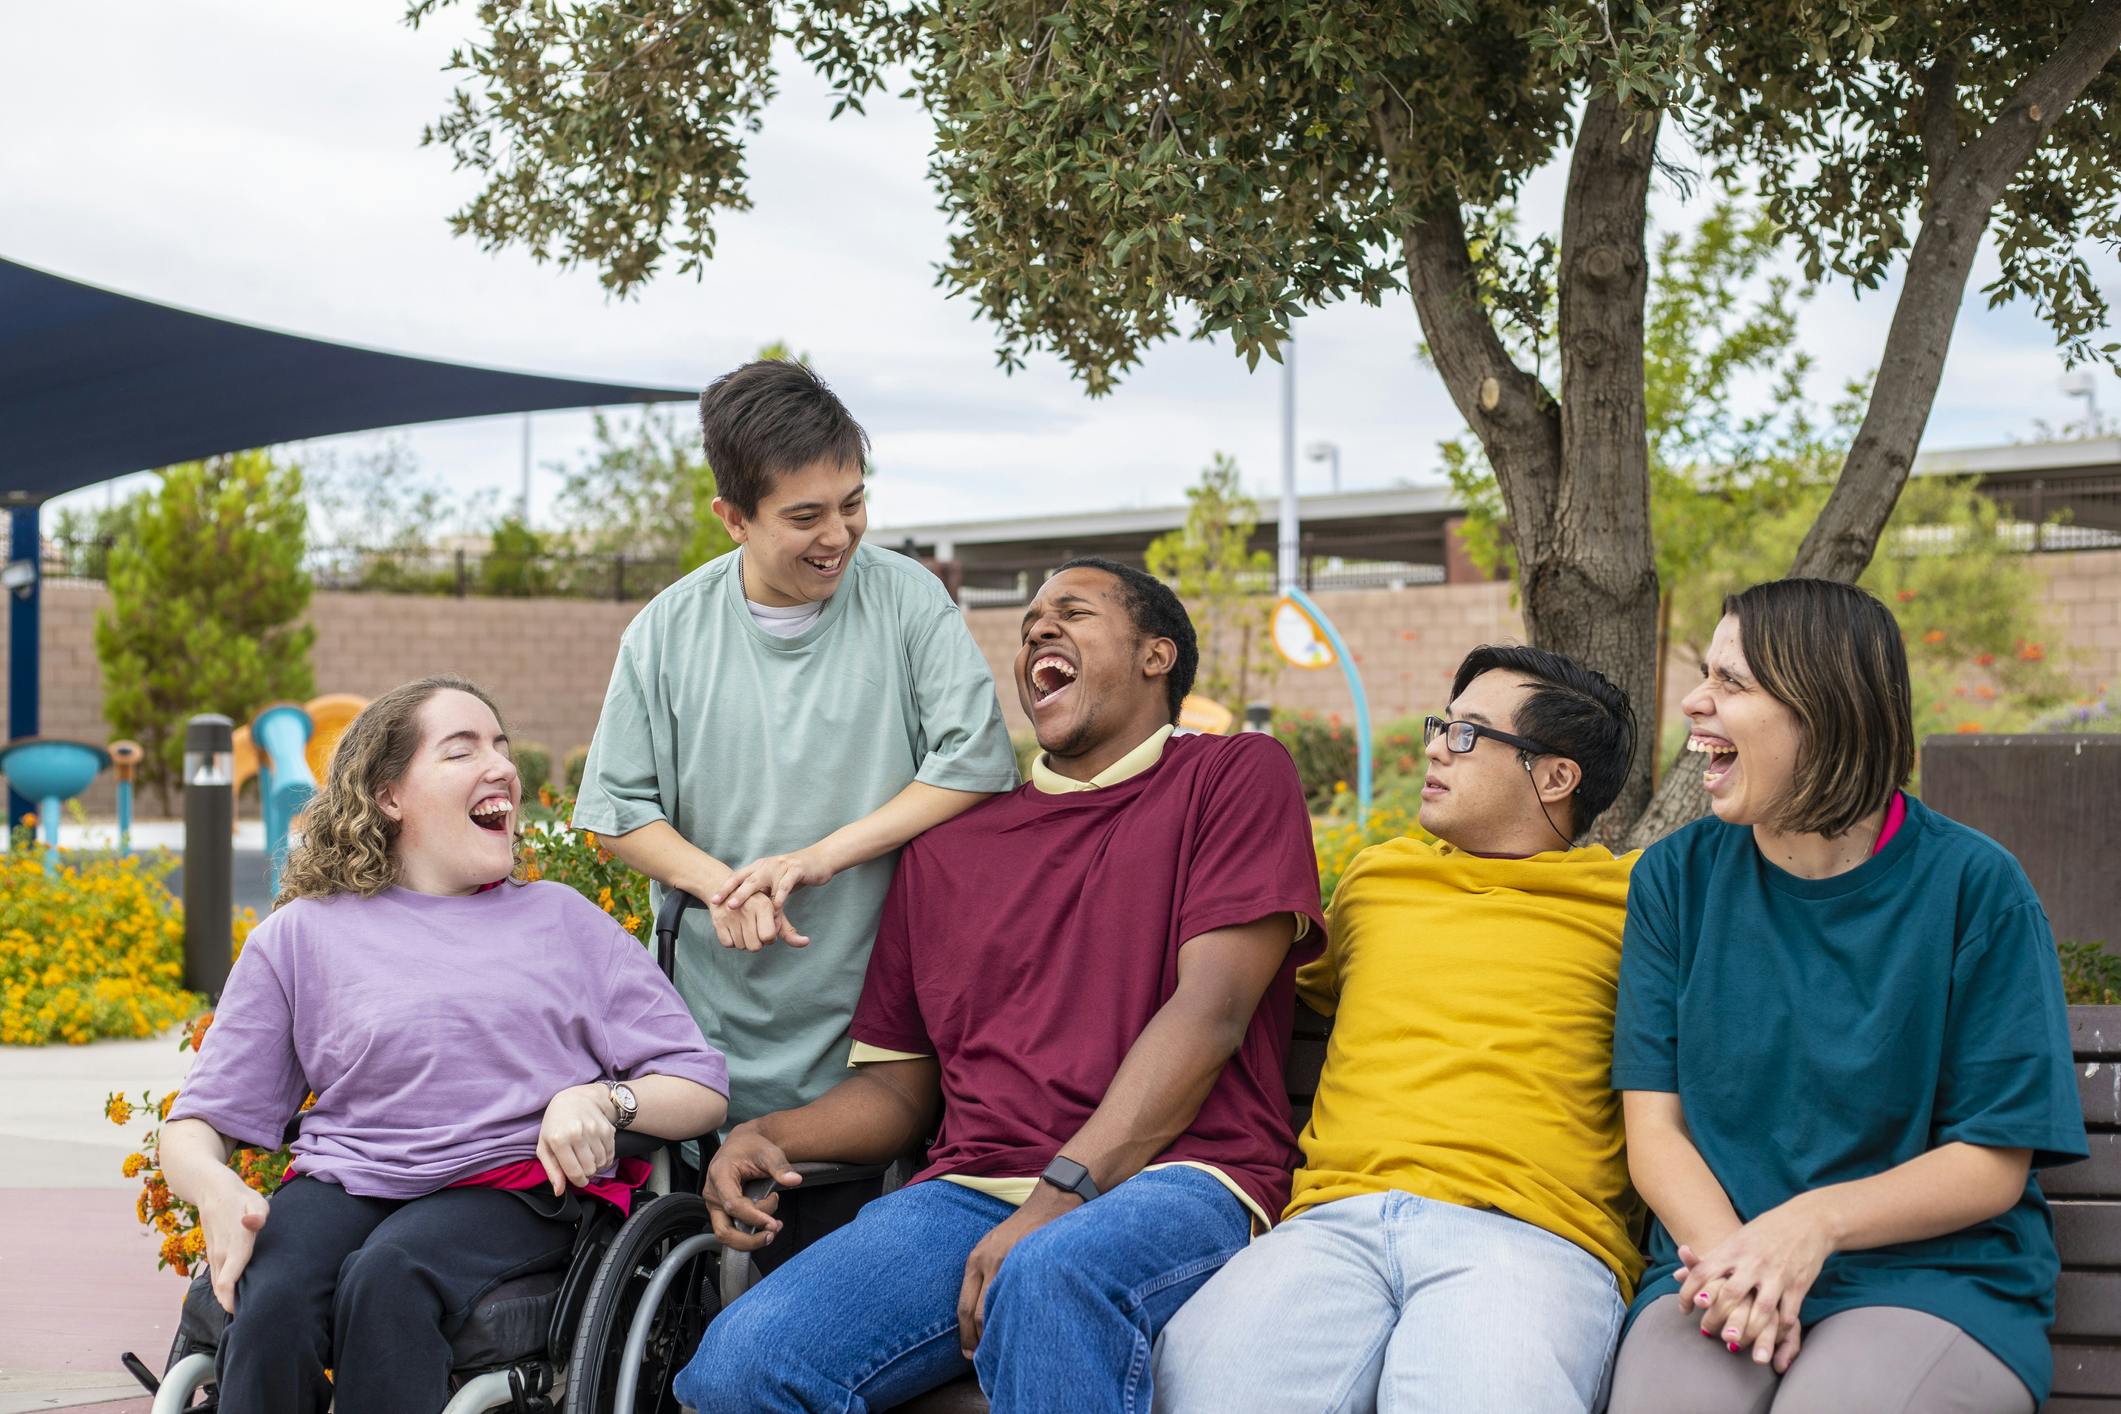 Image of a group of five young people sitting together, laughing and smiling. Two of the people have visible disabilities.